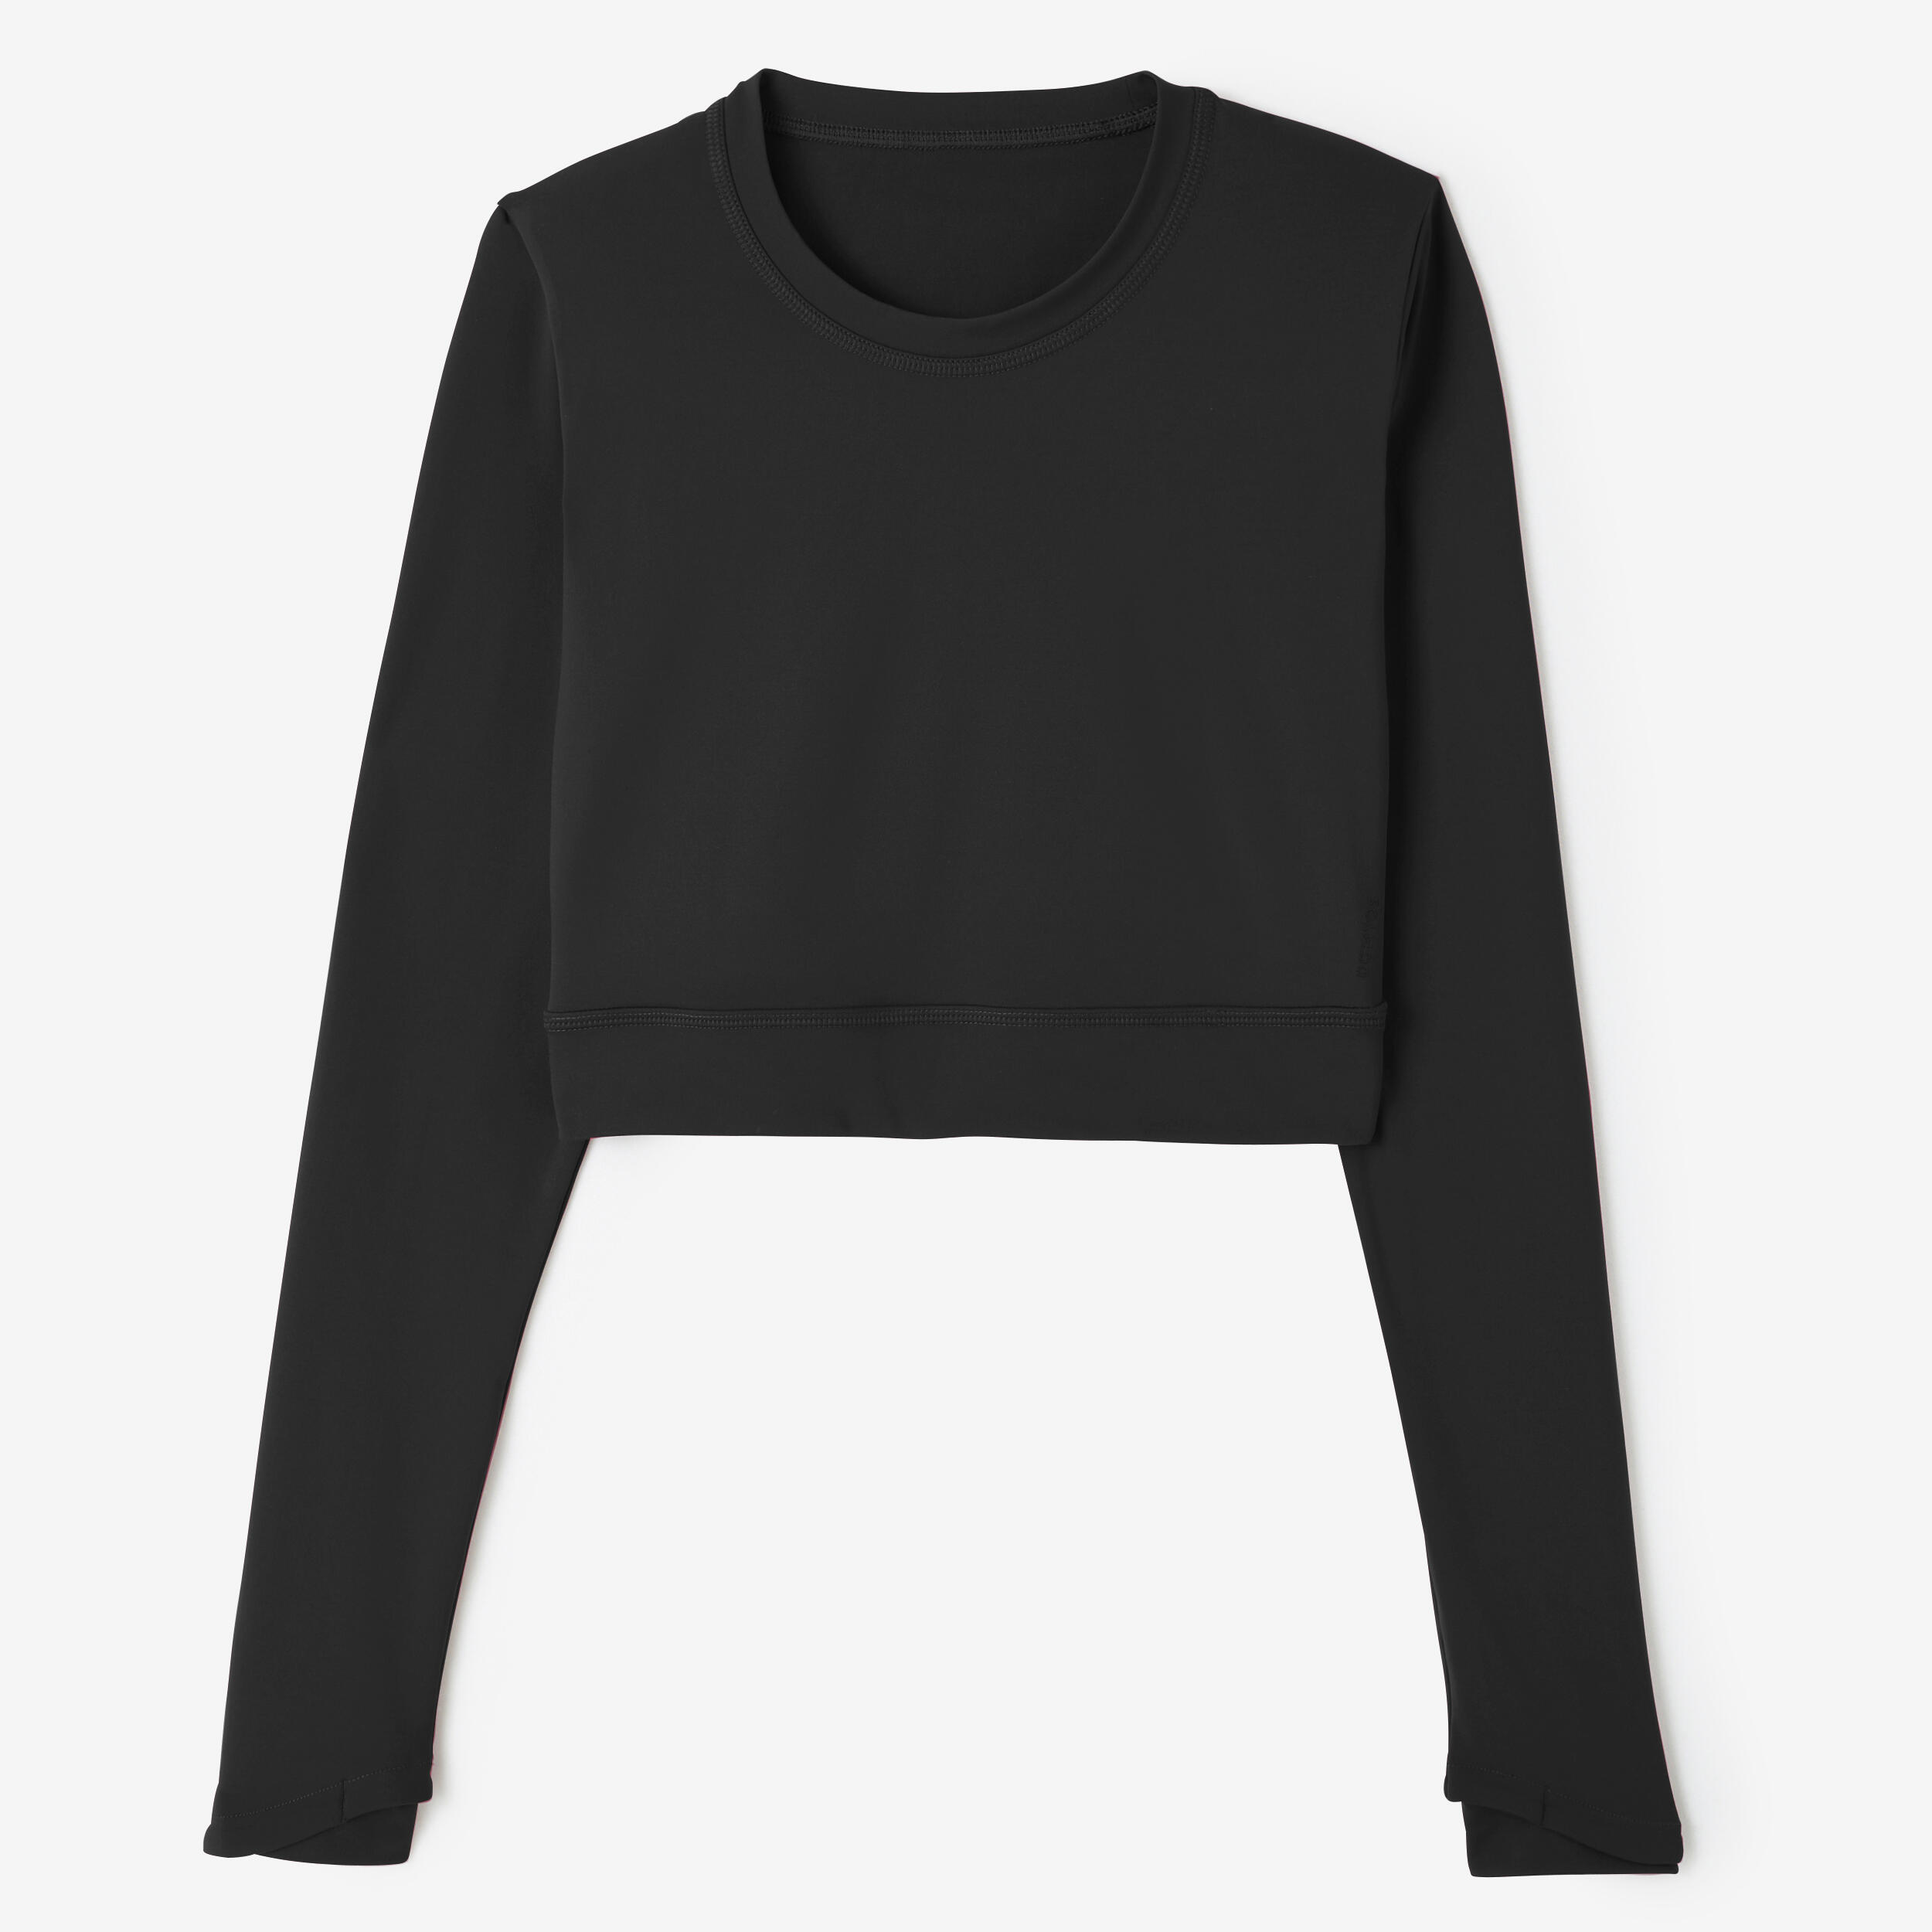 Women’s Cropped Shirt - FTS 500 - DOMYOS